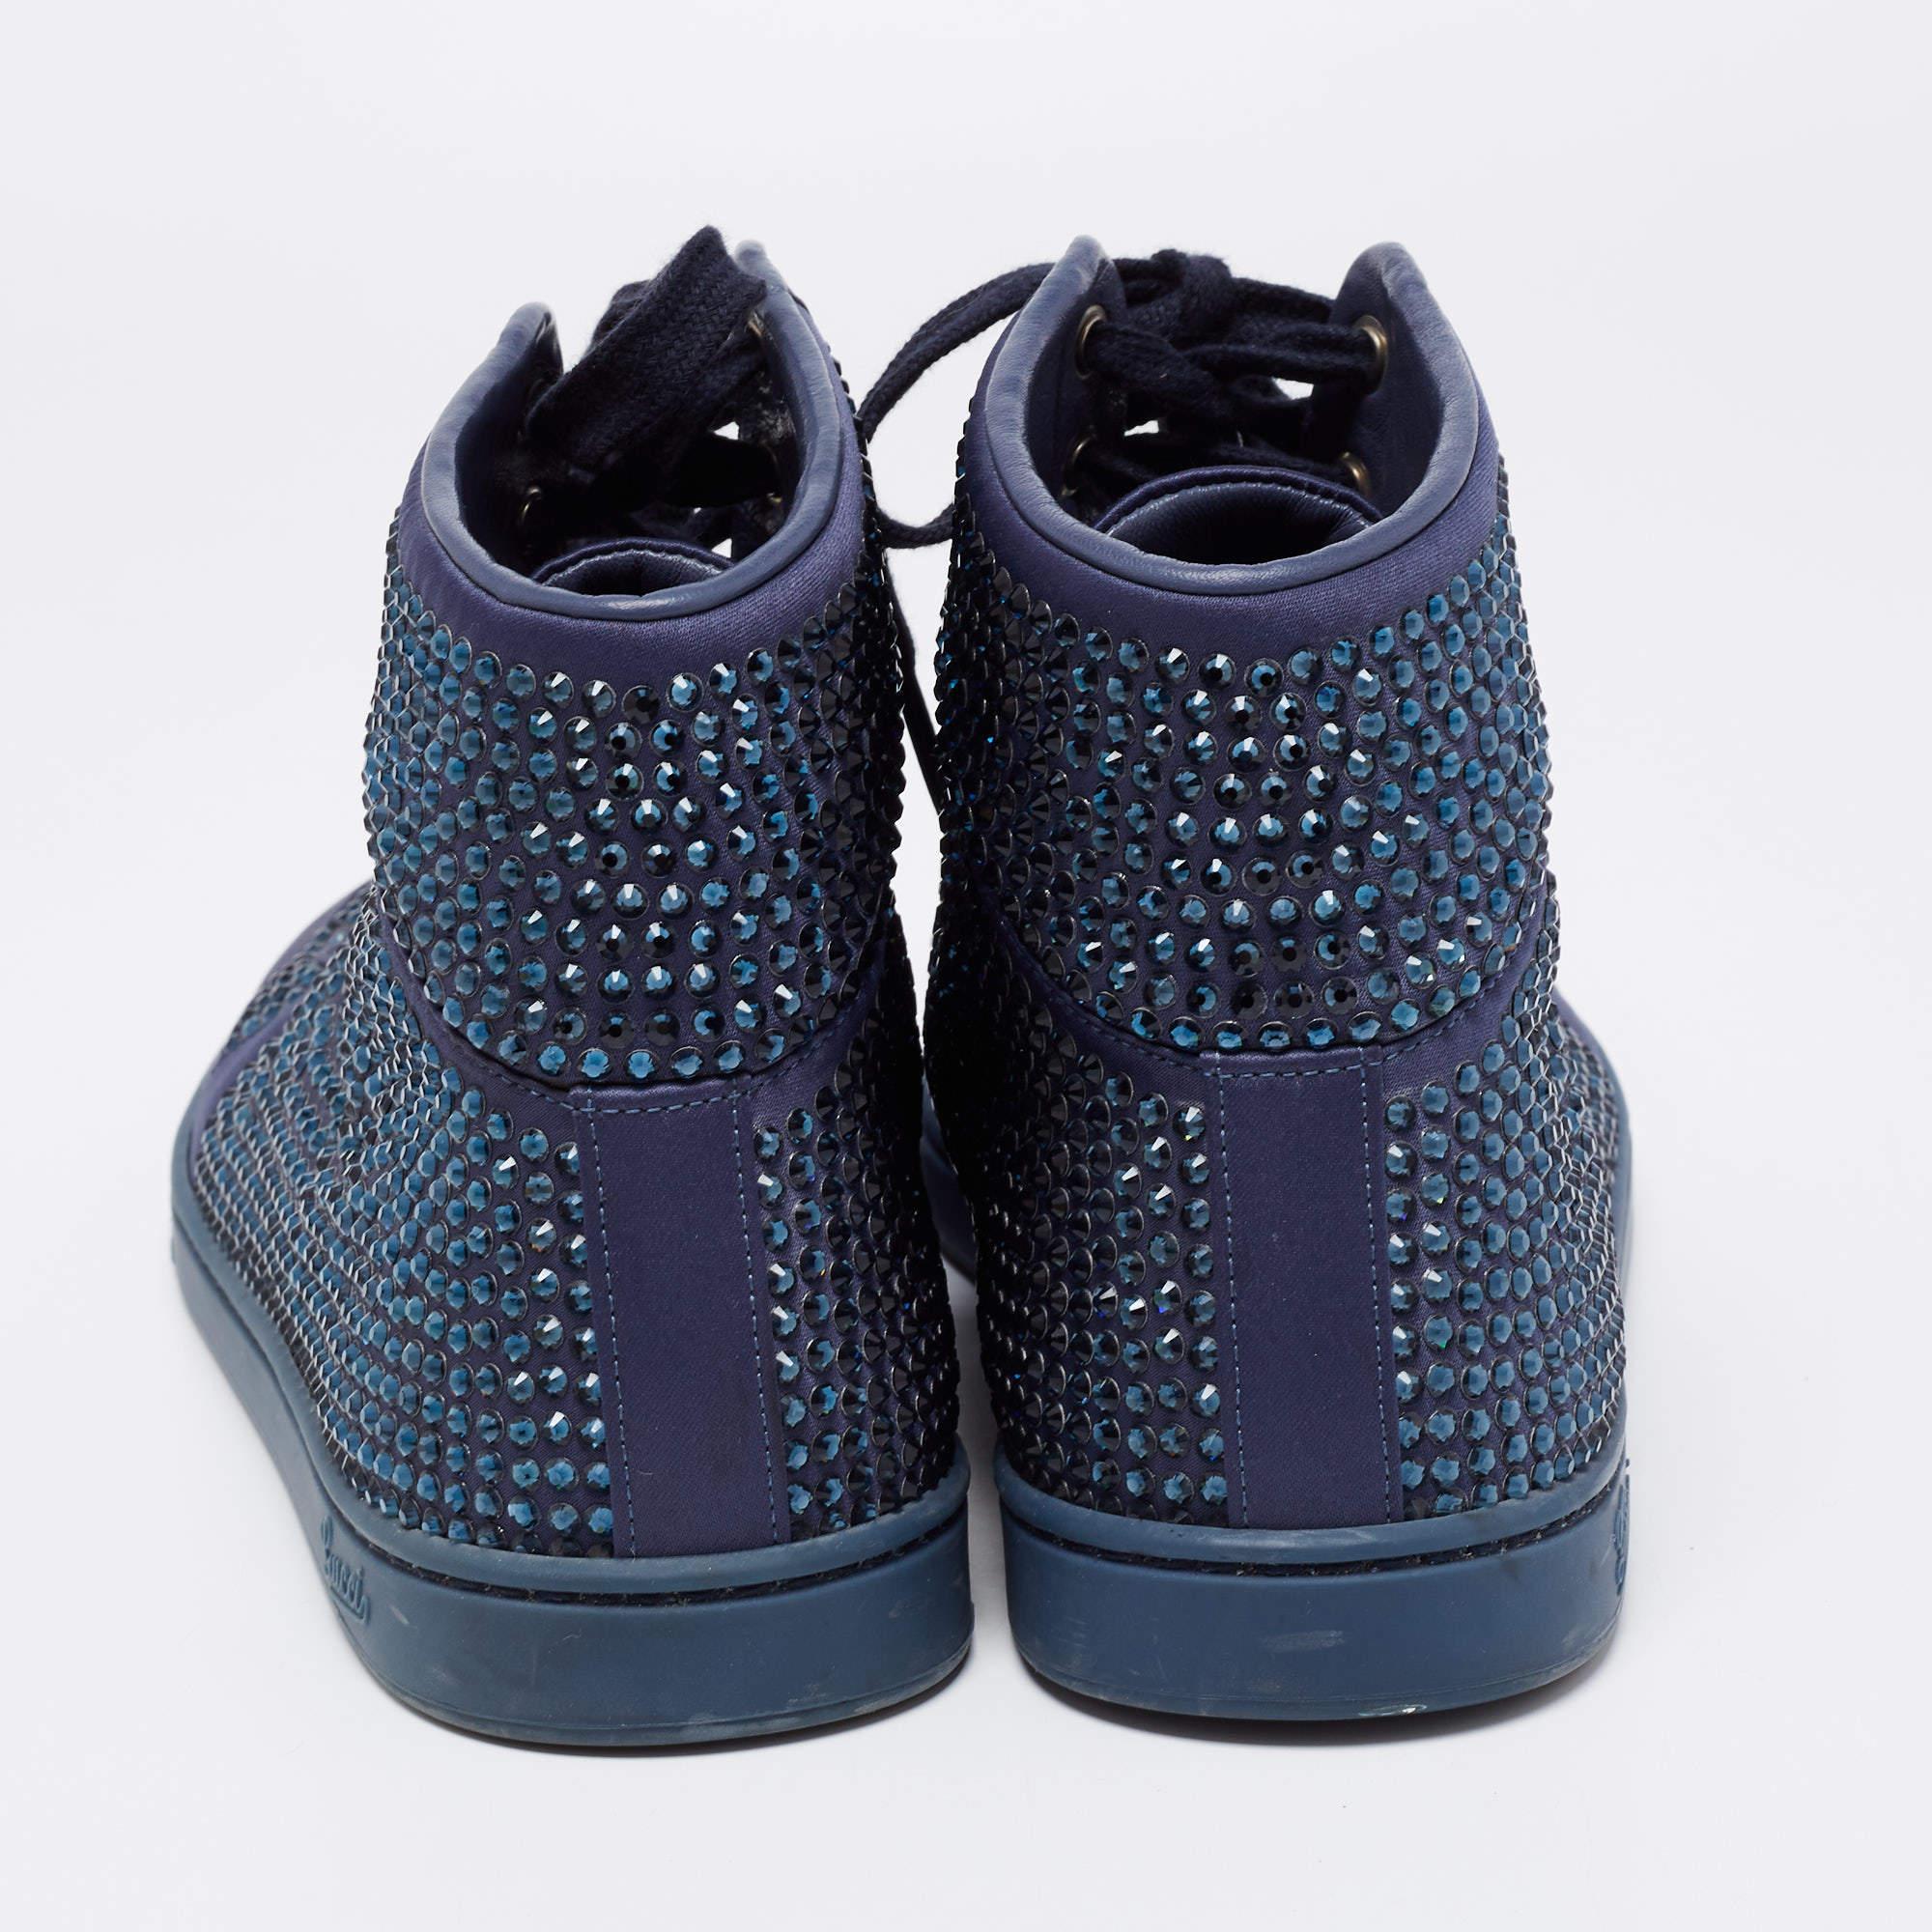 Gucci Blue Satin Crystal Embellished High Top Sneakers Size 39.5 In Good Condition For Sale In Dubai, Al Qouz 2